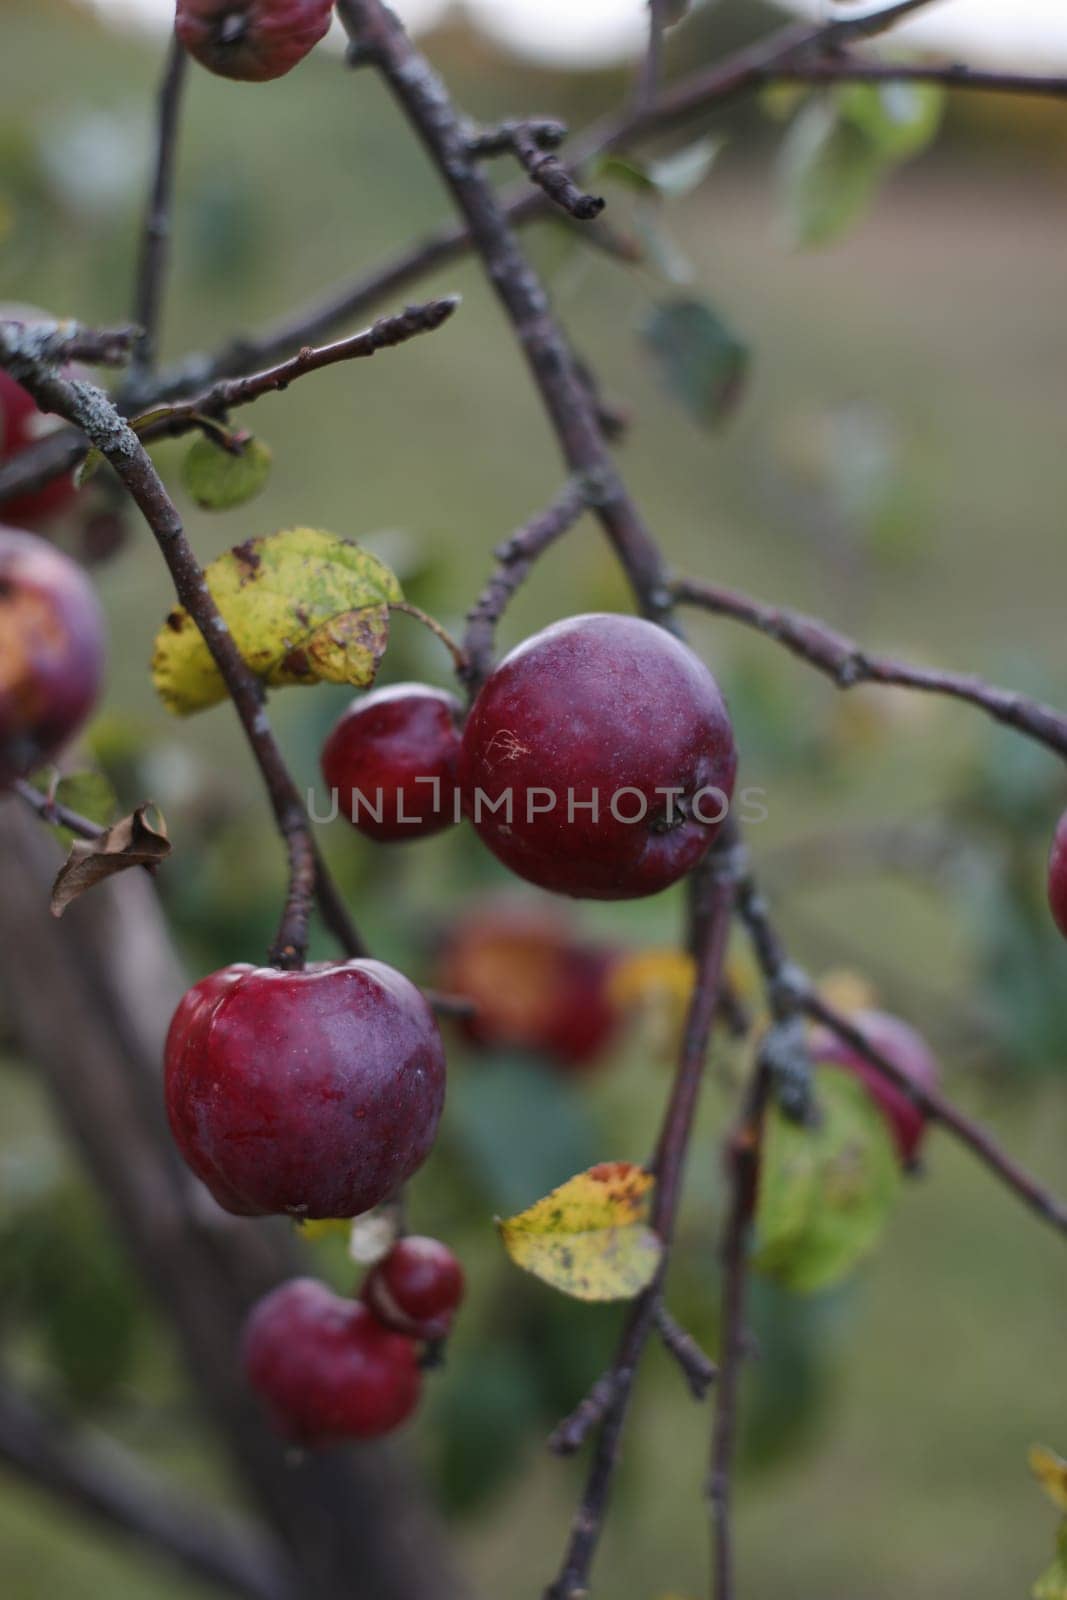 Big red delicious apple on a tree branch in the fruit garden at Fall Harvest. Autumn cloudy day, soft shadow.